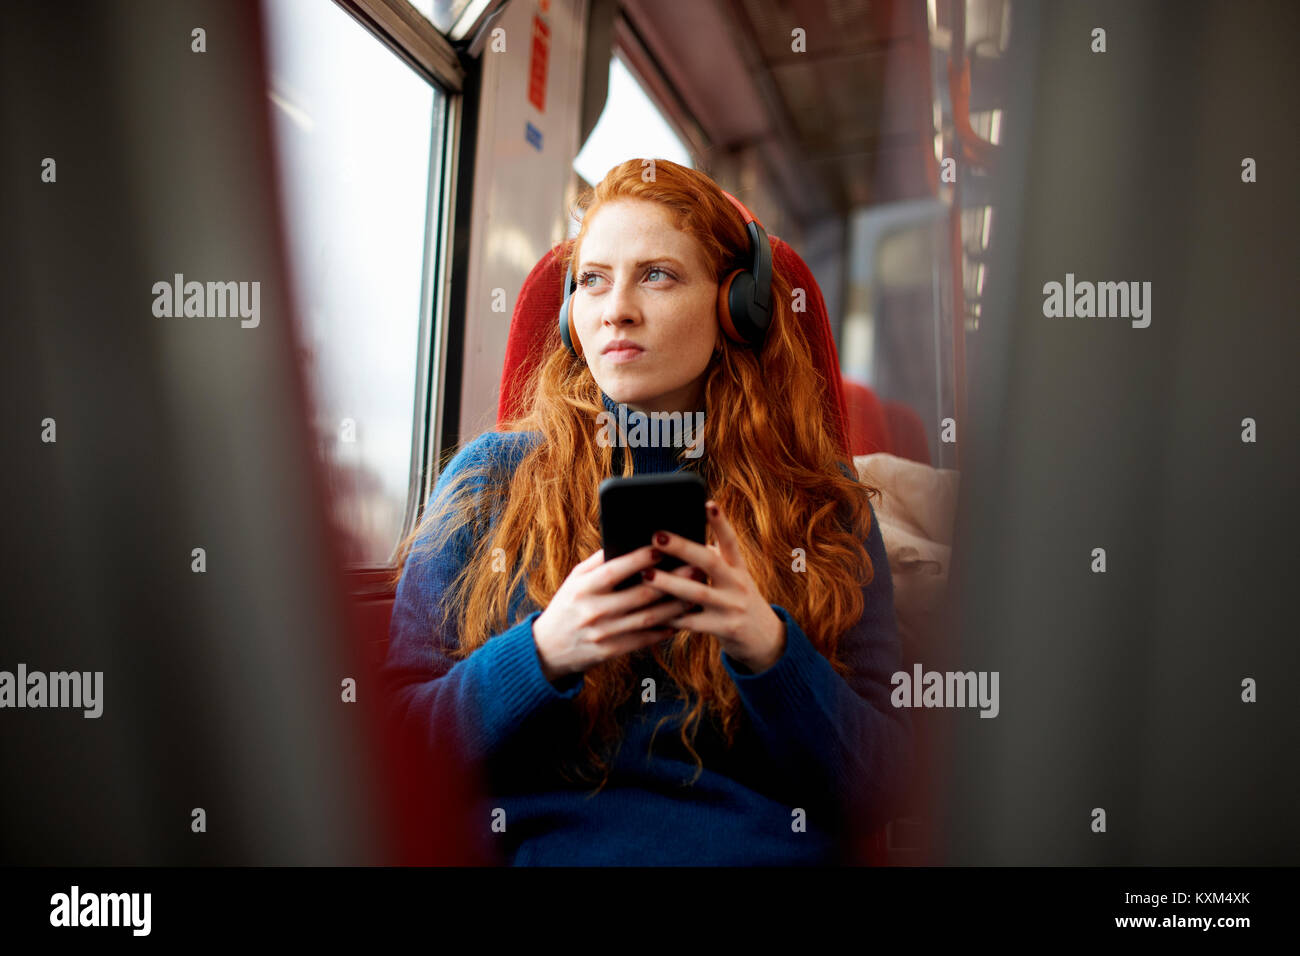 Woman on train listening to music on mobile phone with headphones,London Stock Photo